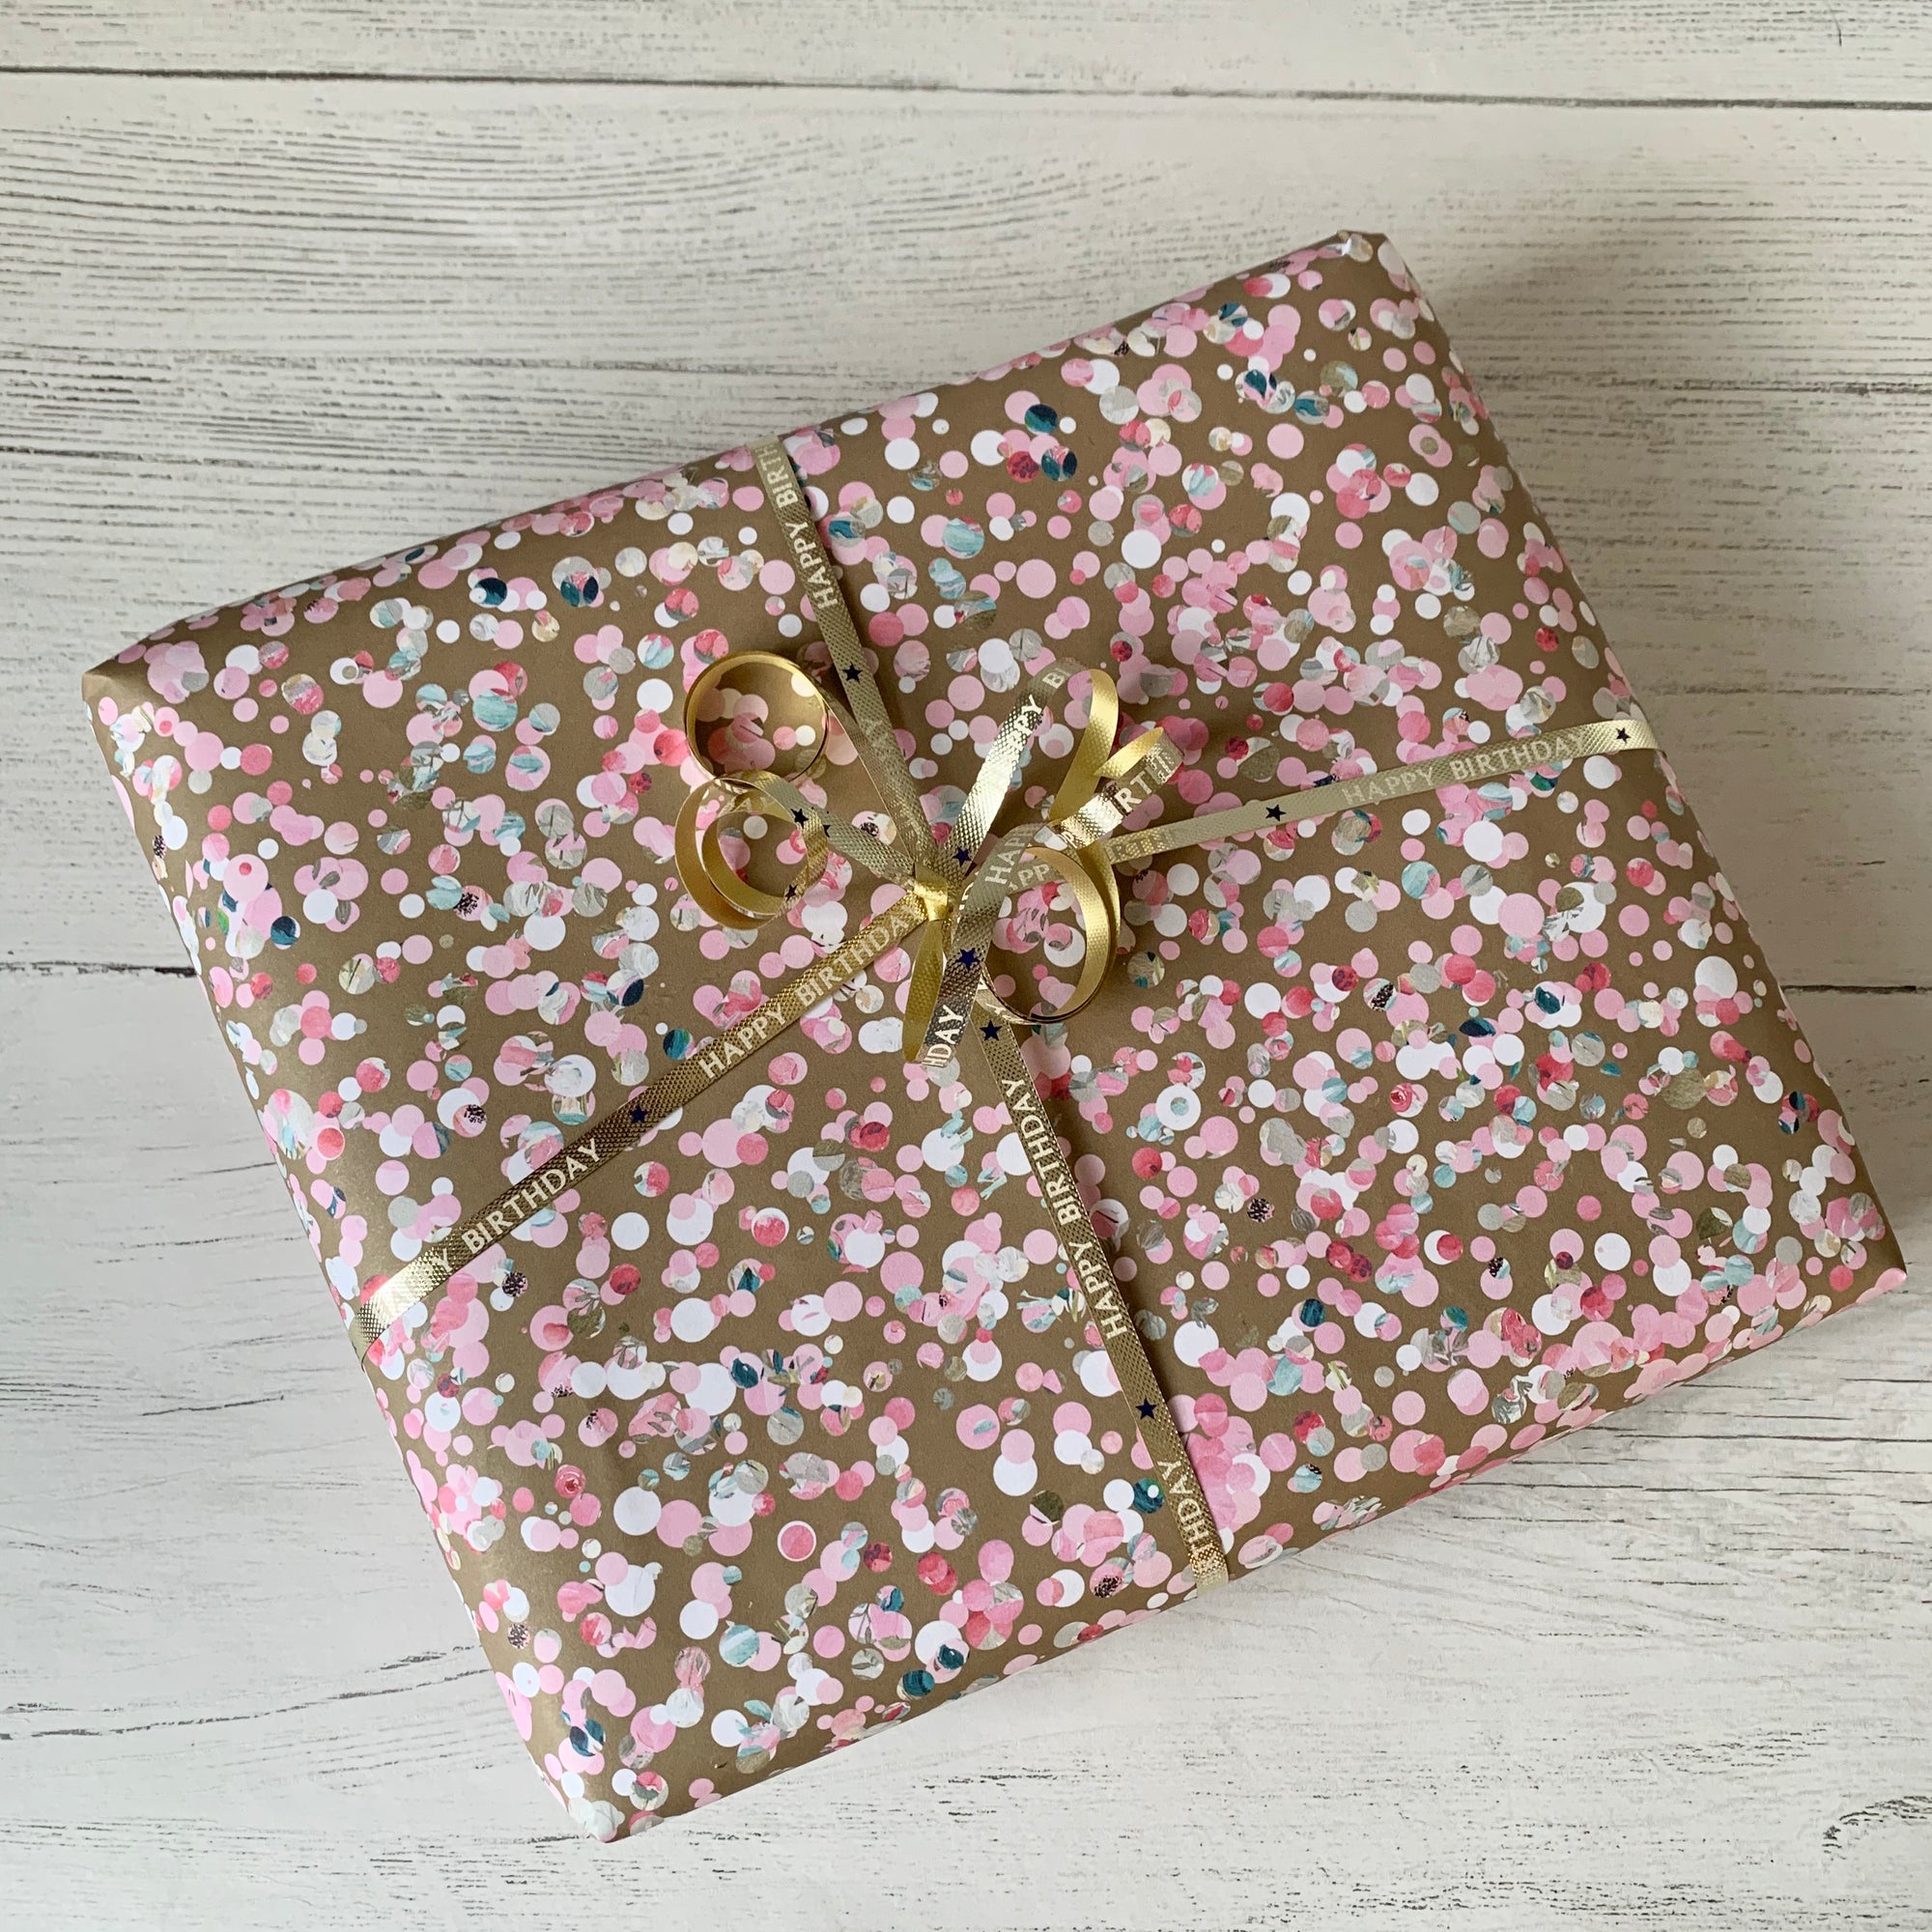 FREE GIFT WRAPPING by Ferrers Gallery